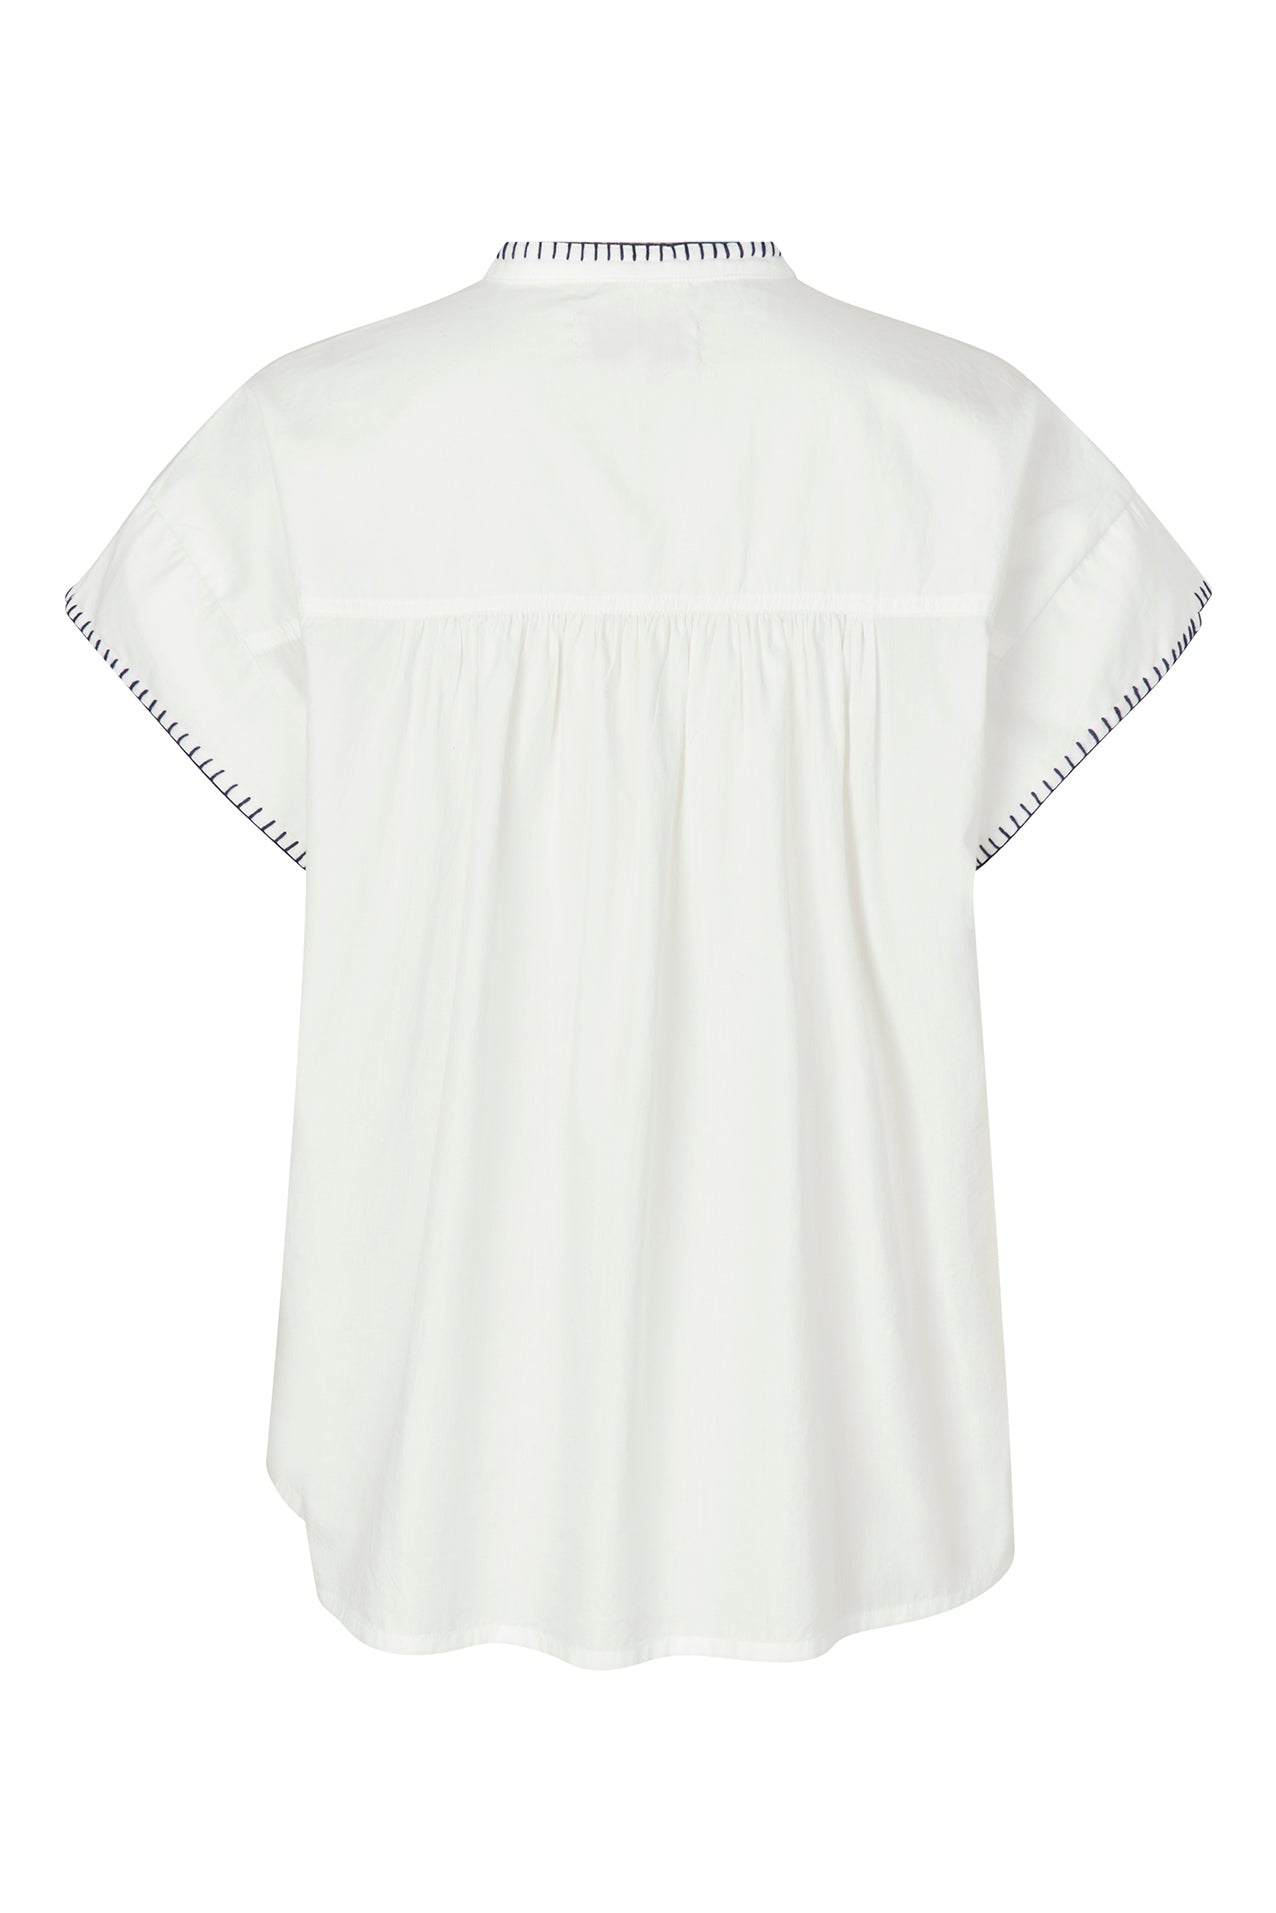 Lollys Laundry MollyLL Top SS T-shirt 01 White